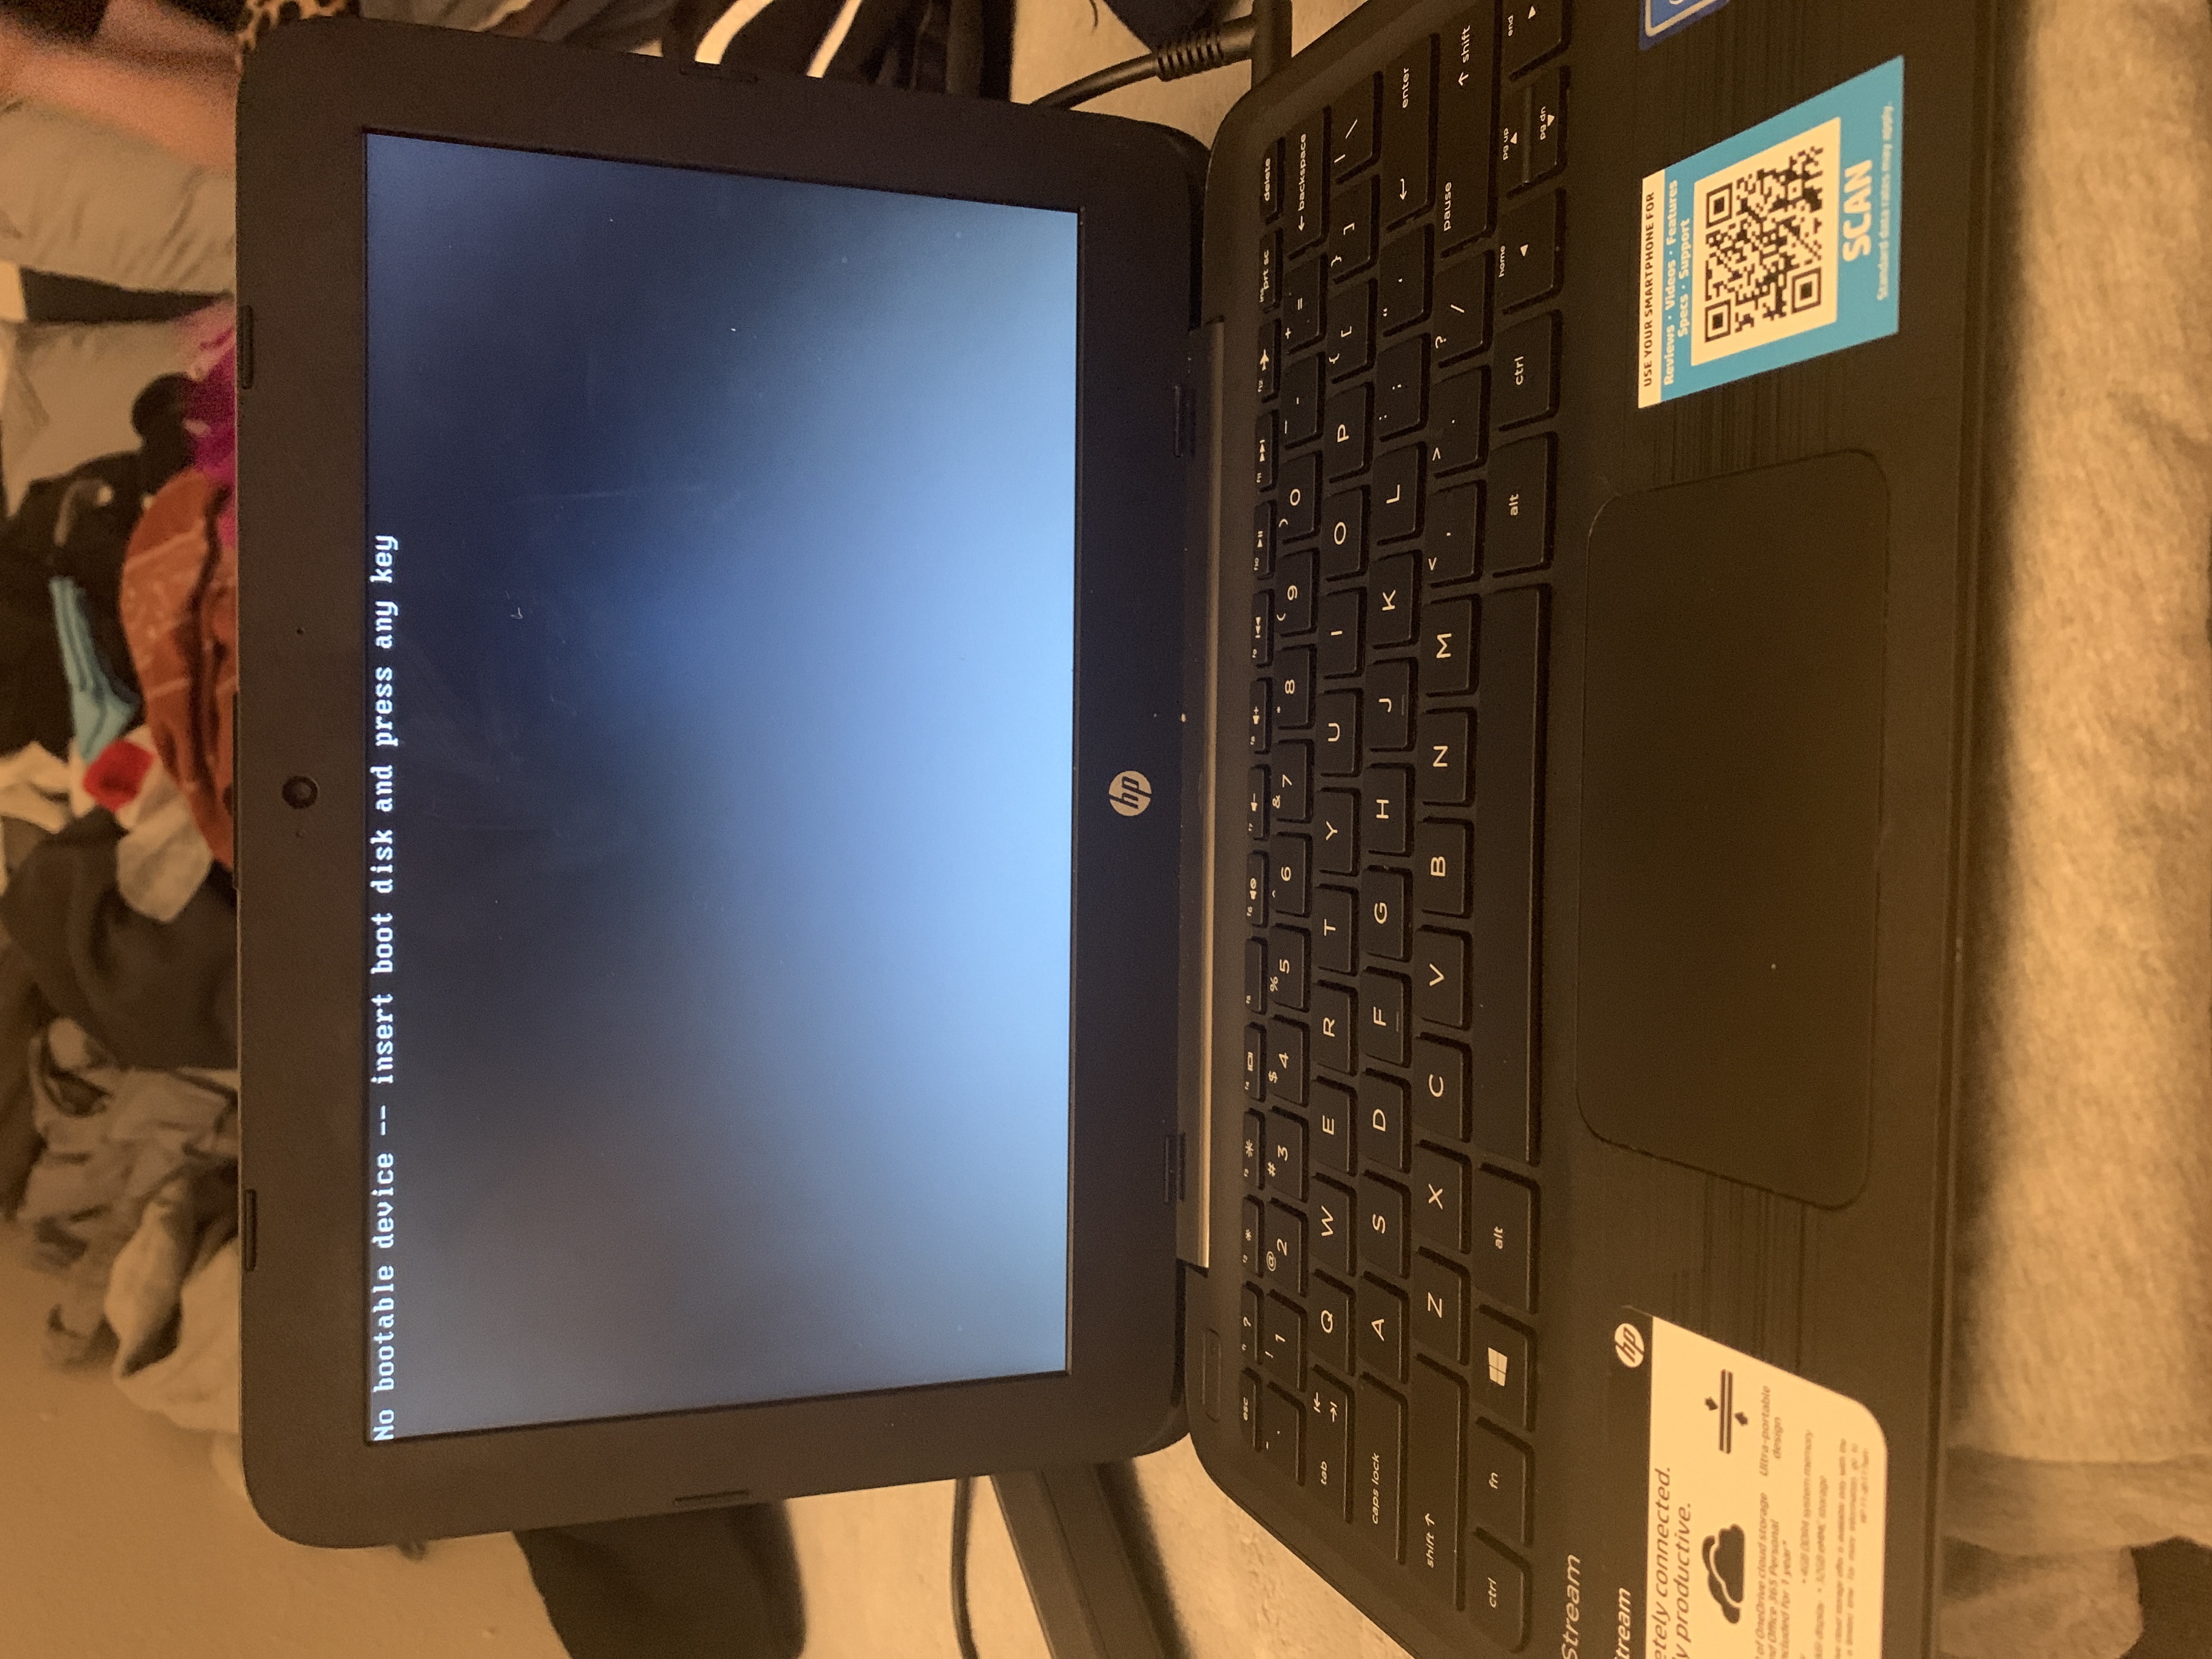 No bootable device insert boot disk and press any key - HP Support  Community - 7171089